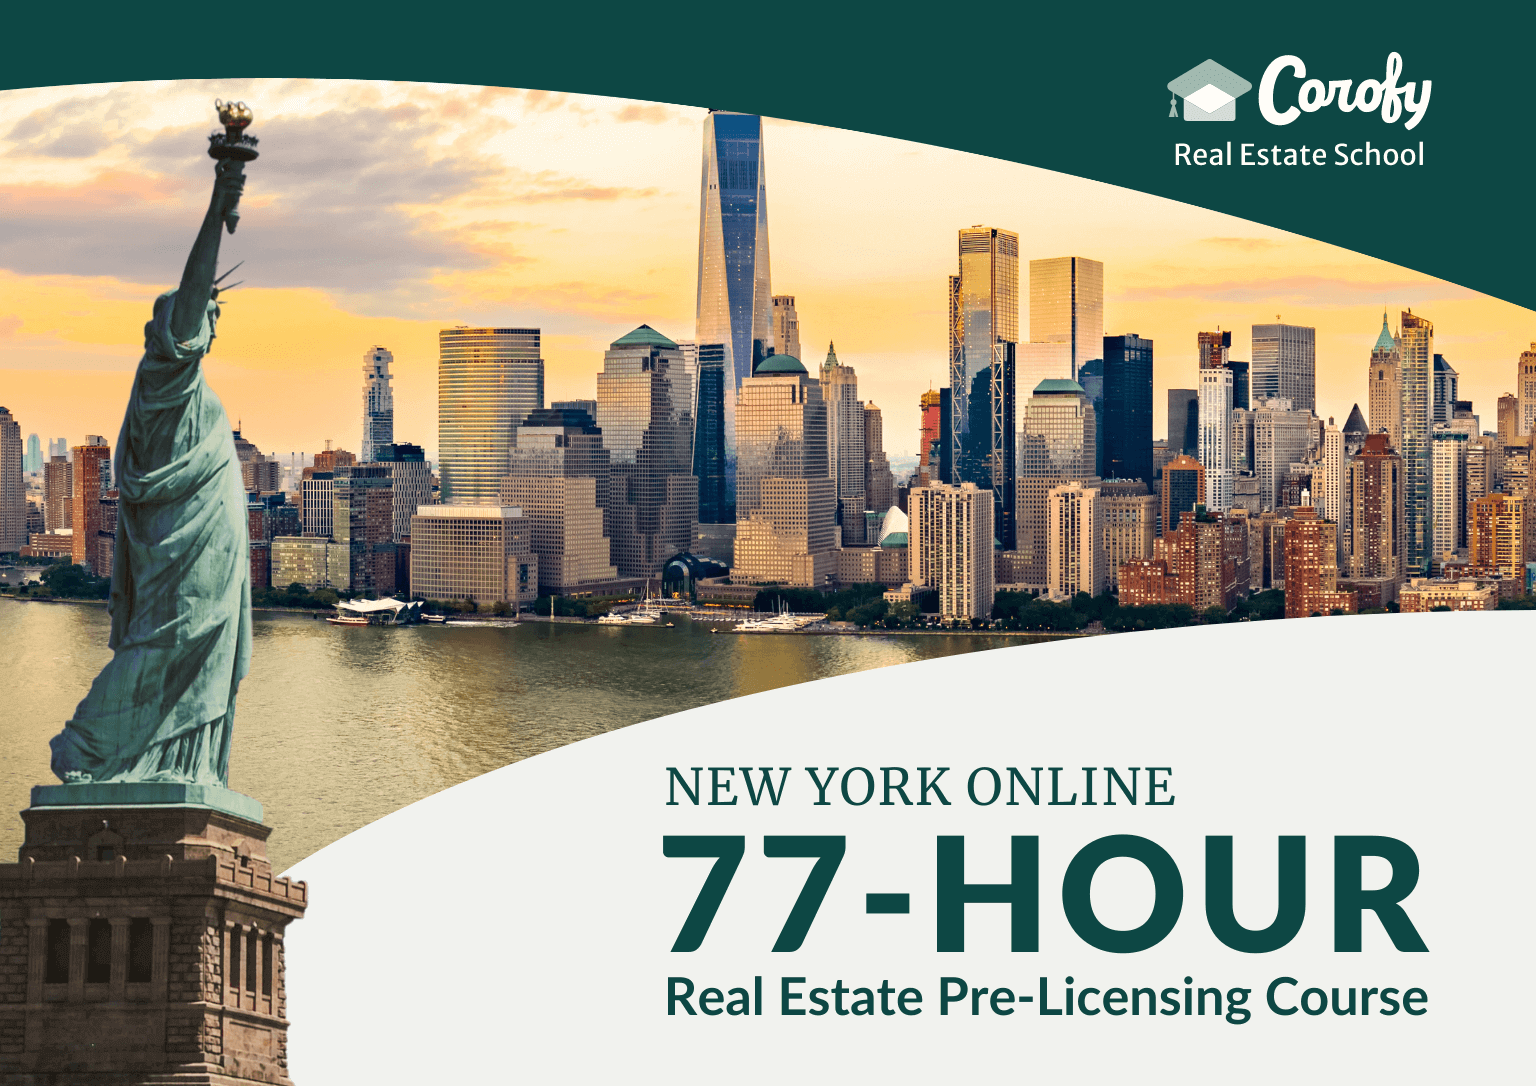 New York Online 77-hour Real Estate Pre-Licensing Course